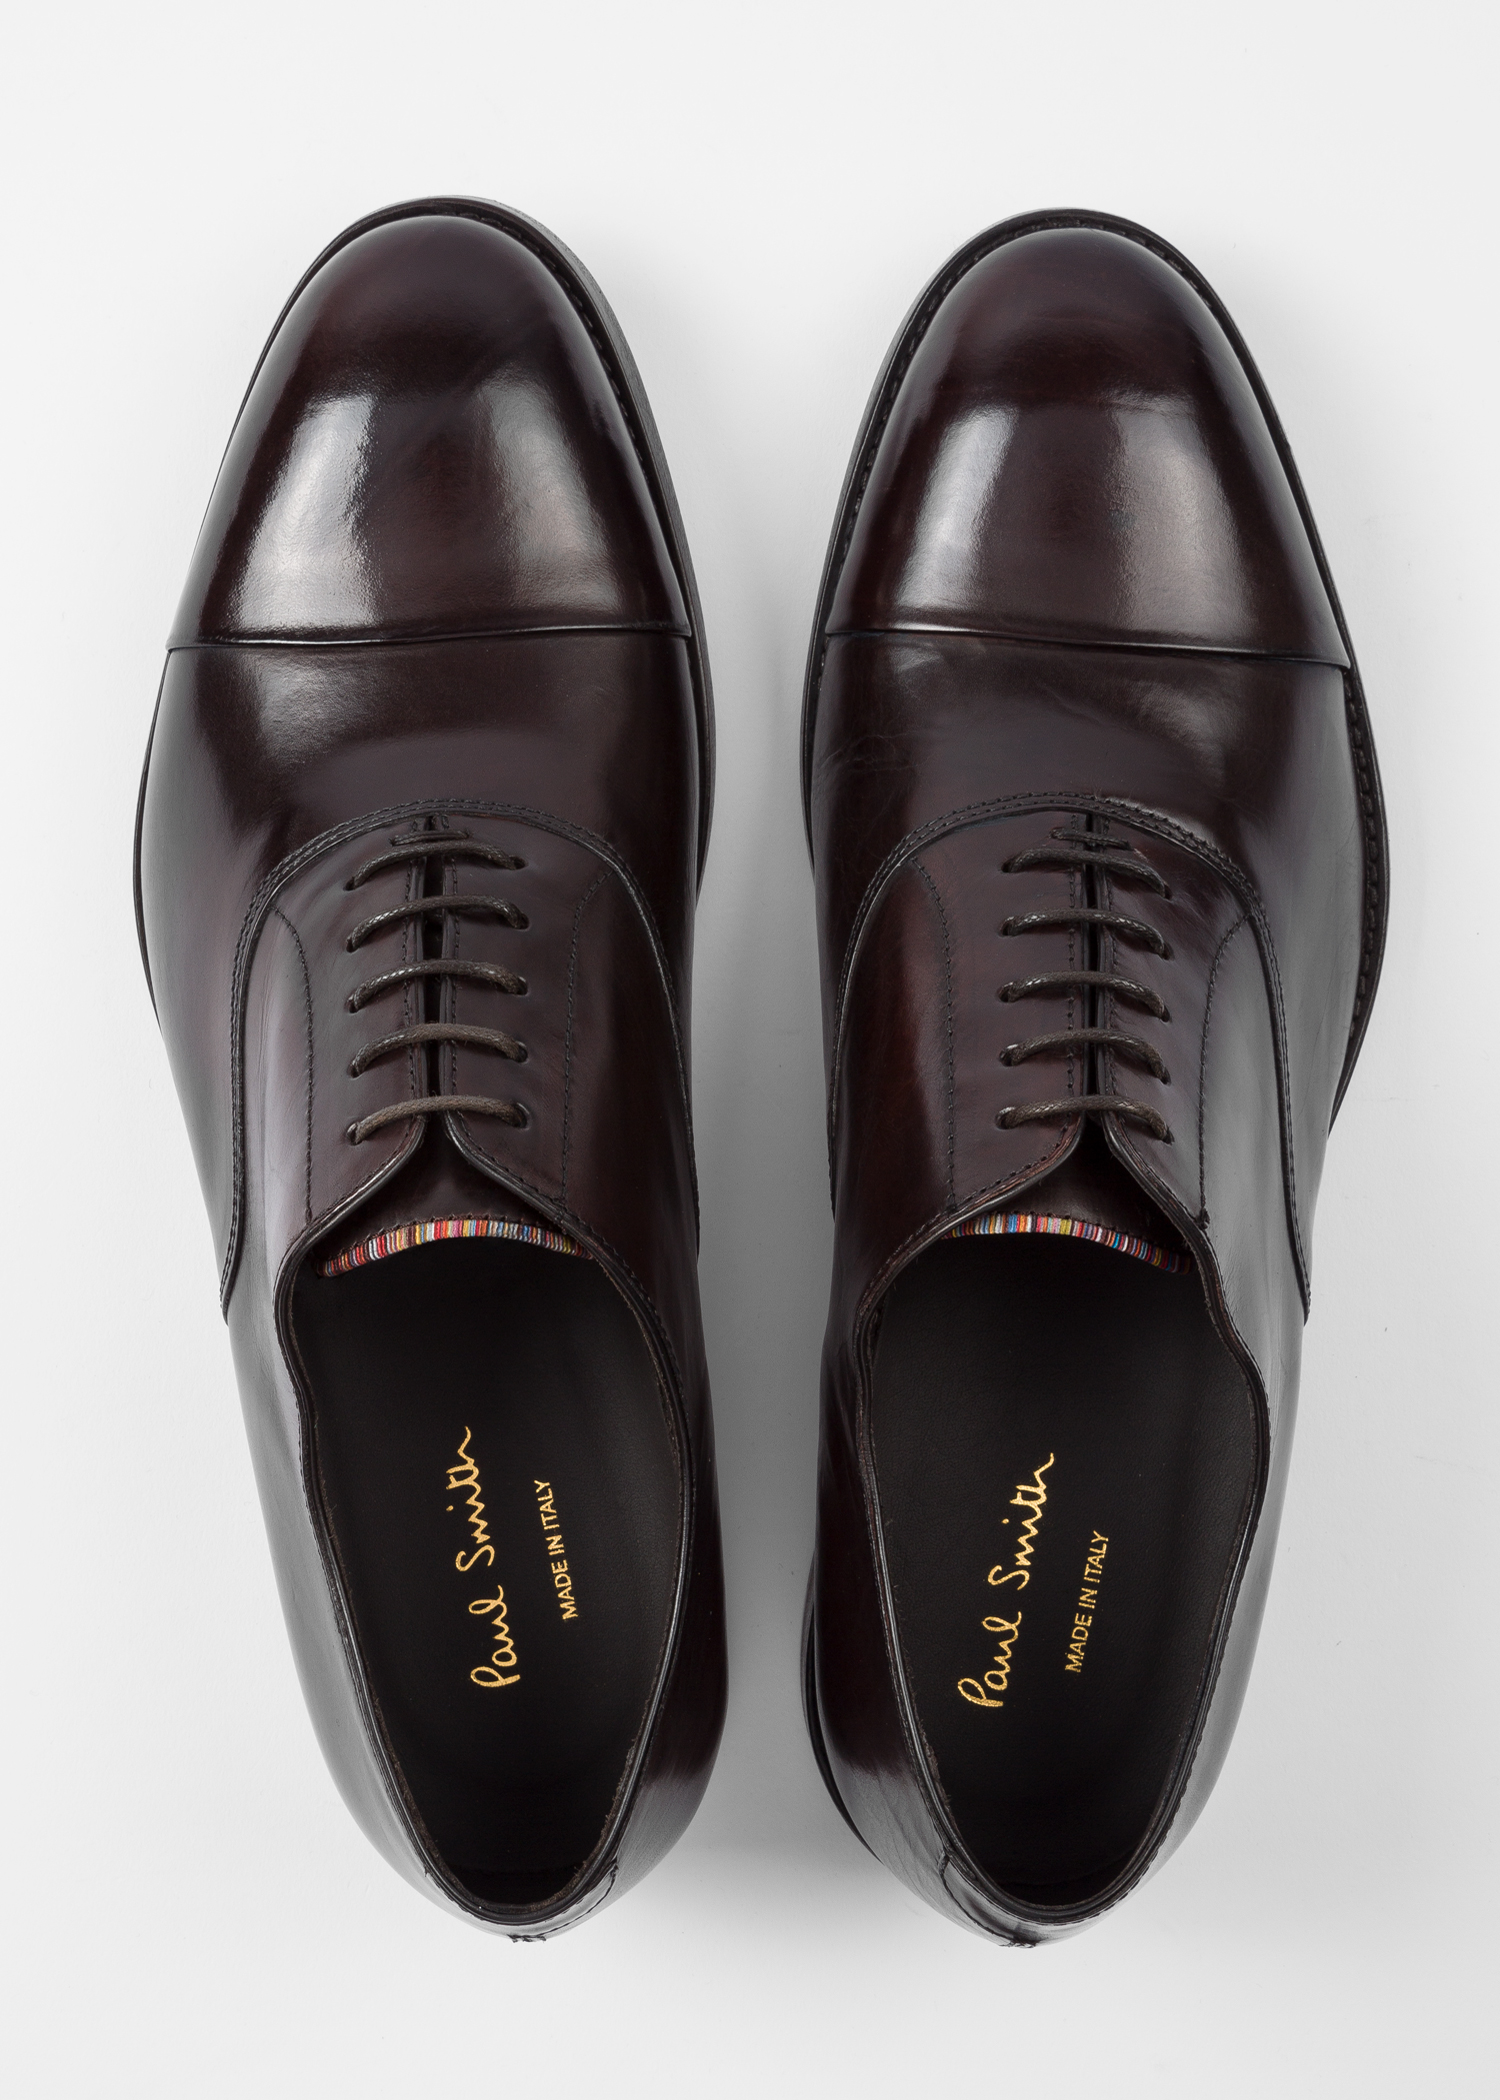 Top Down View - Men's Chocolate Brown Leather 'Brent' Oxford Shoes With 'Signature Stripe' Details Paul Smith